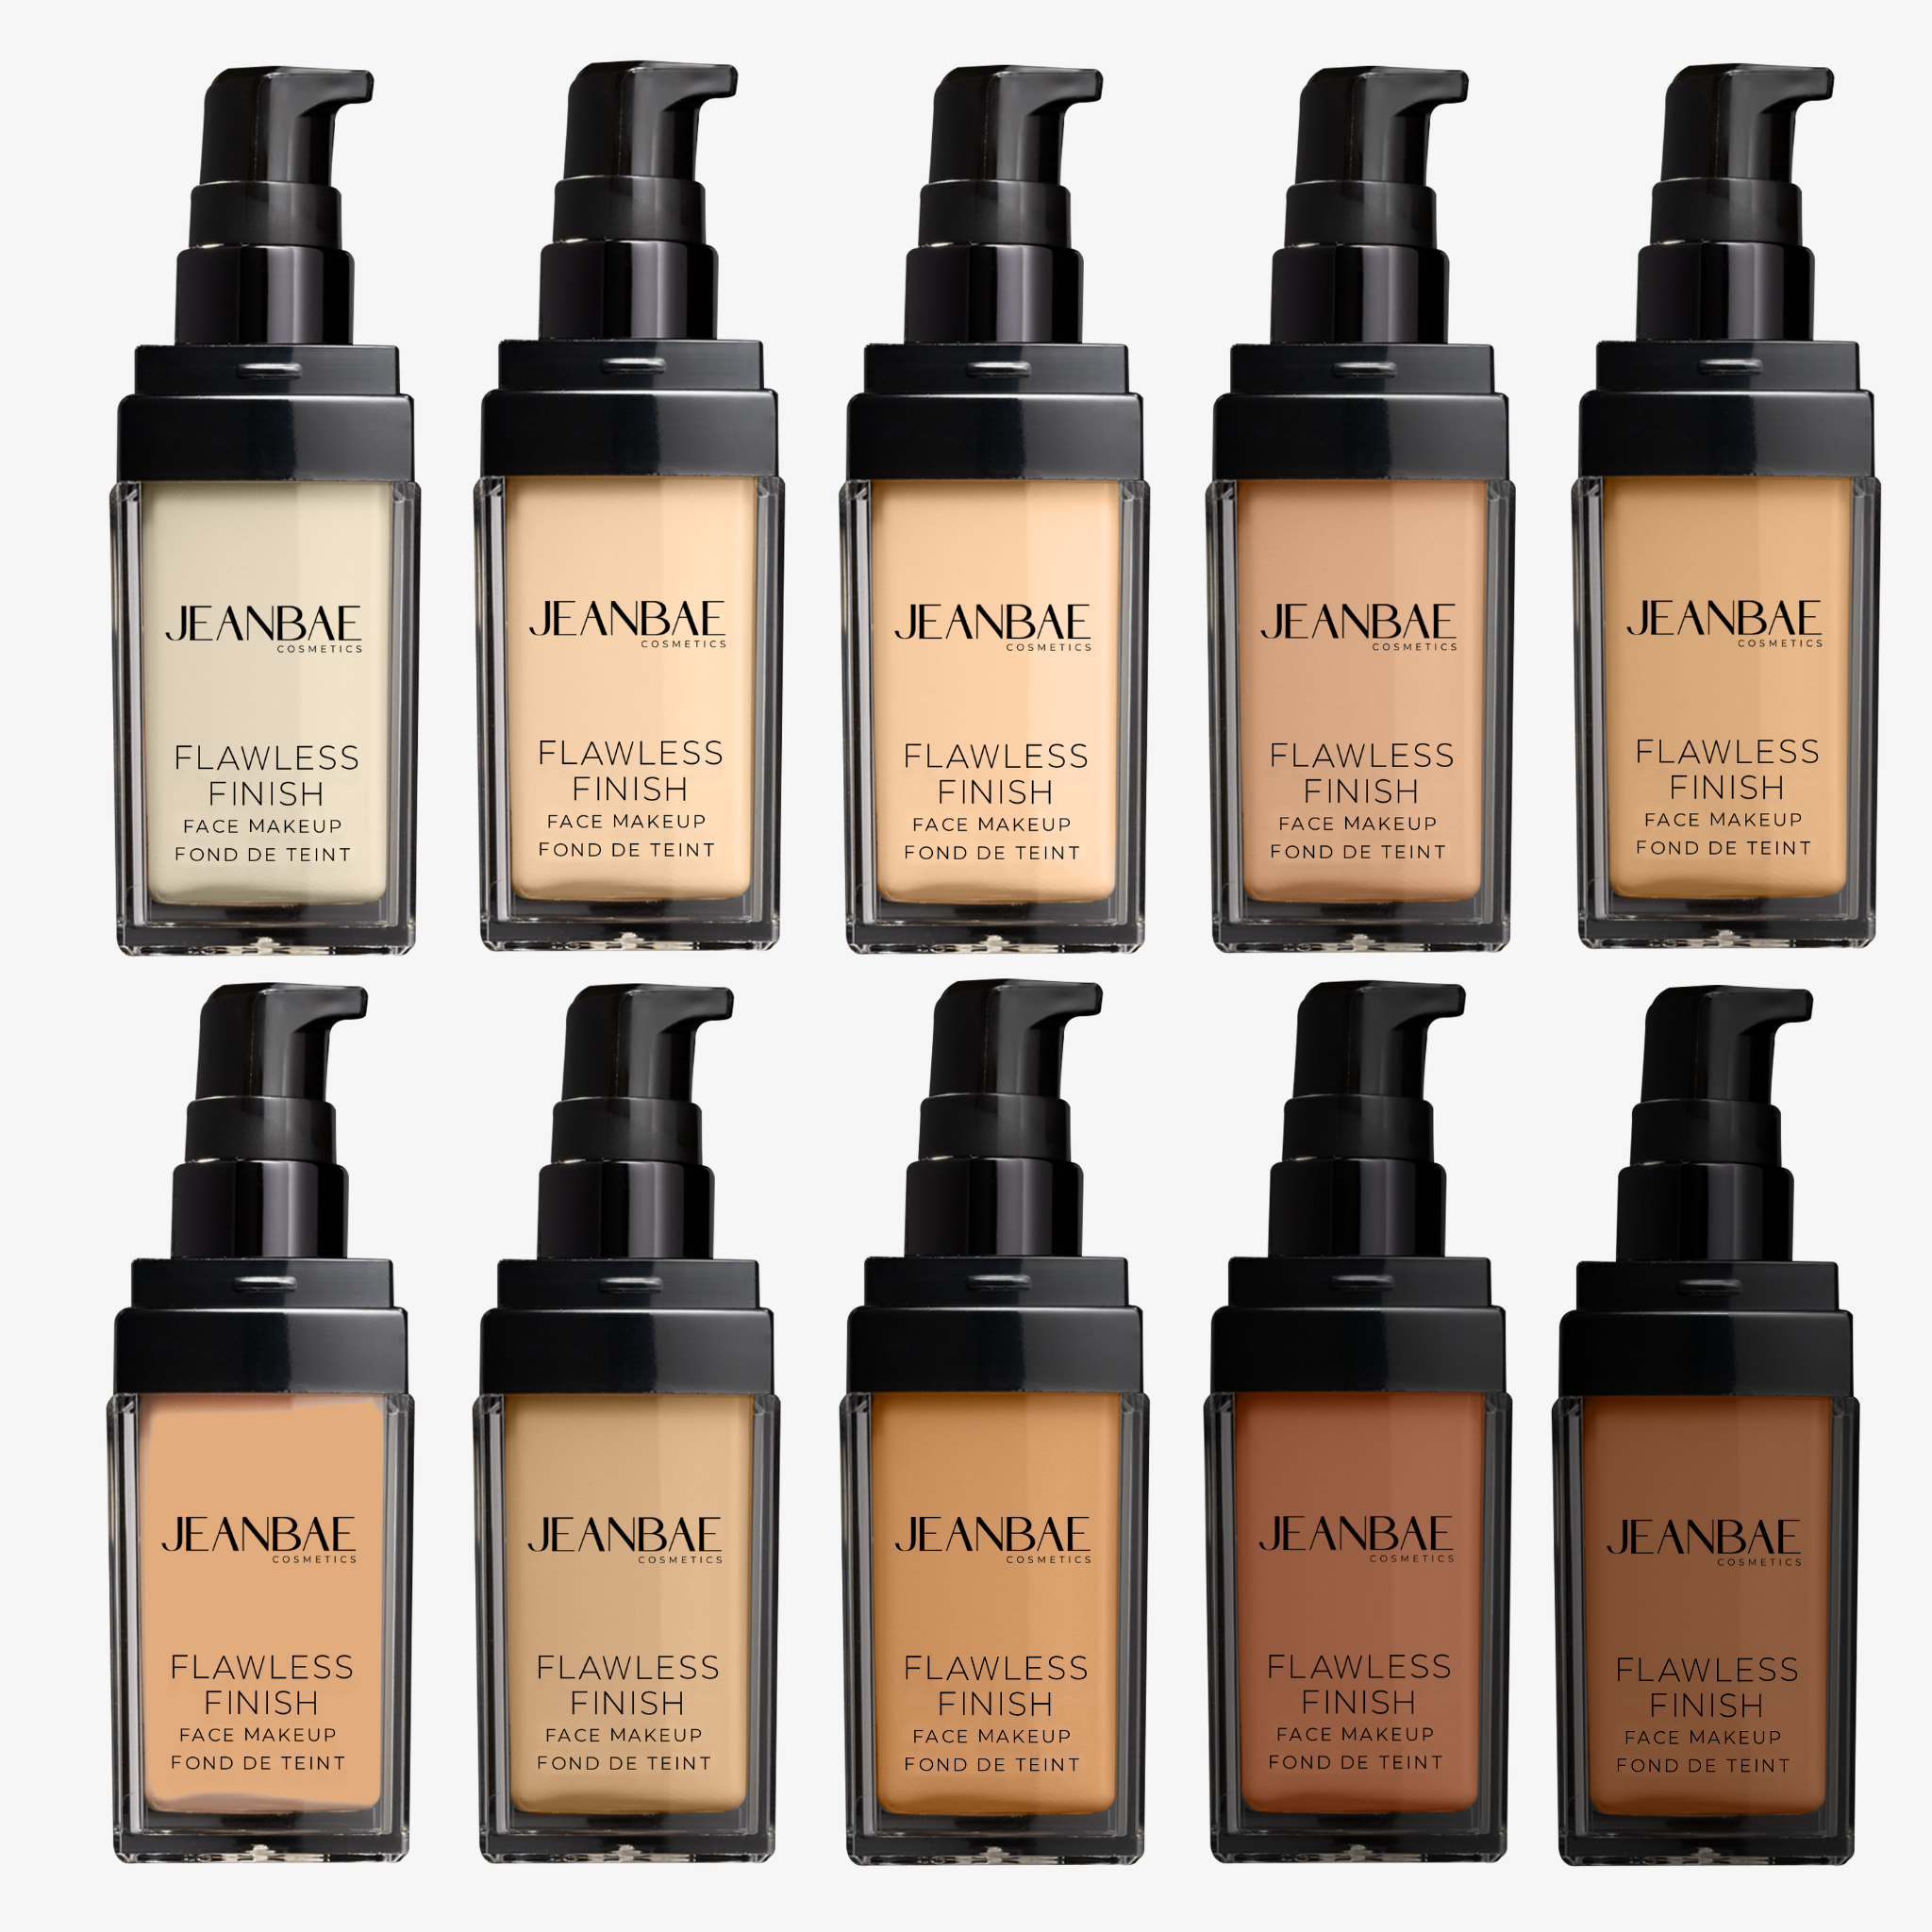 Achieve a flawless and polished look with our water-based liquid foundation, resulting in a perfectly comfortable matte finish. THIS PRODUCT IS Cruelty-Free, Hypoallergenic, Non-Comedogenic, Halal Certified, and EU Compliant. Free of Parabens and Fragrances.